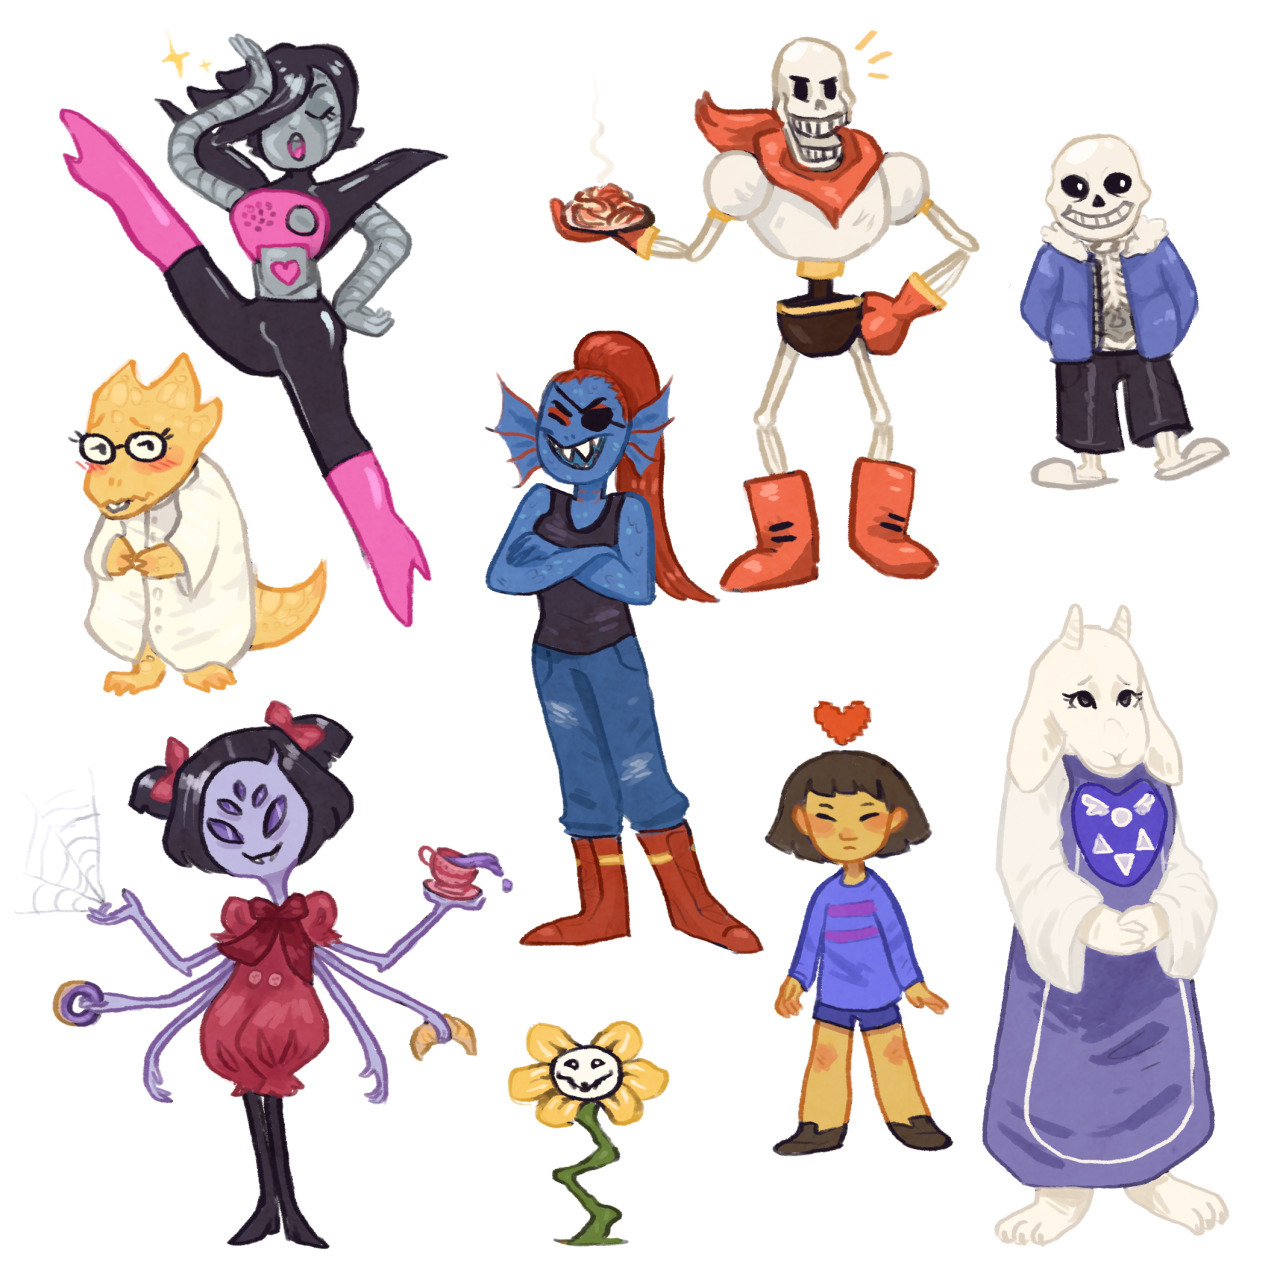 Bloxi — Which Undertale character are you?